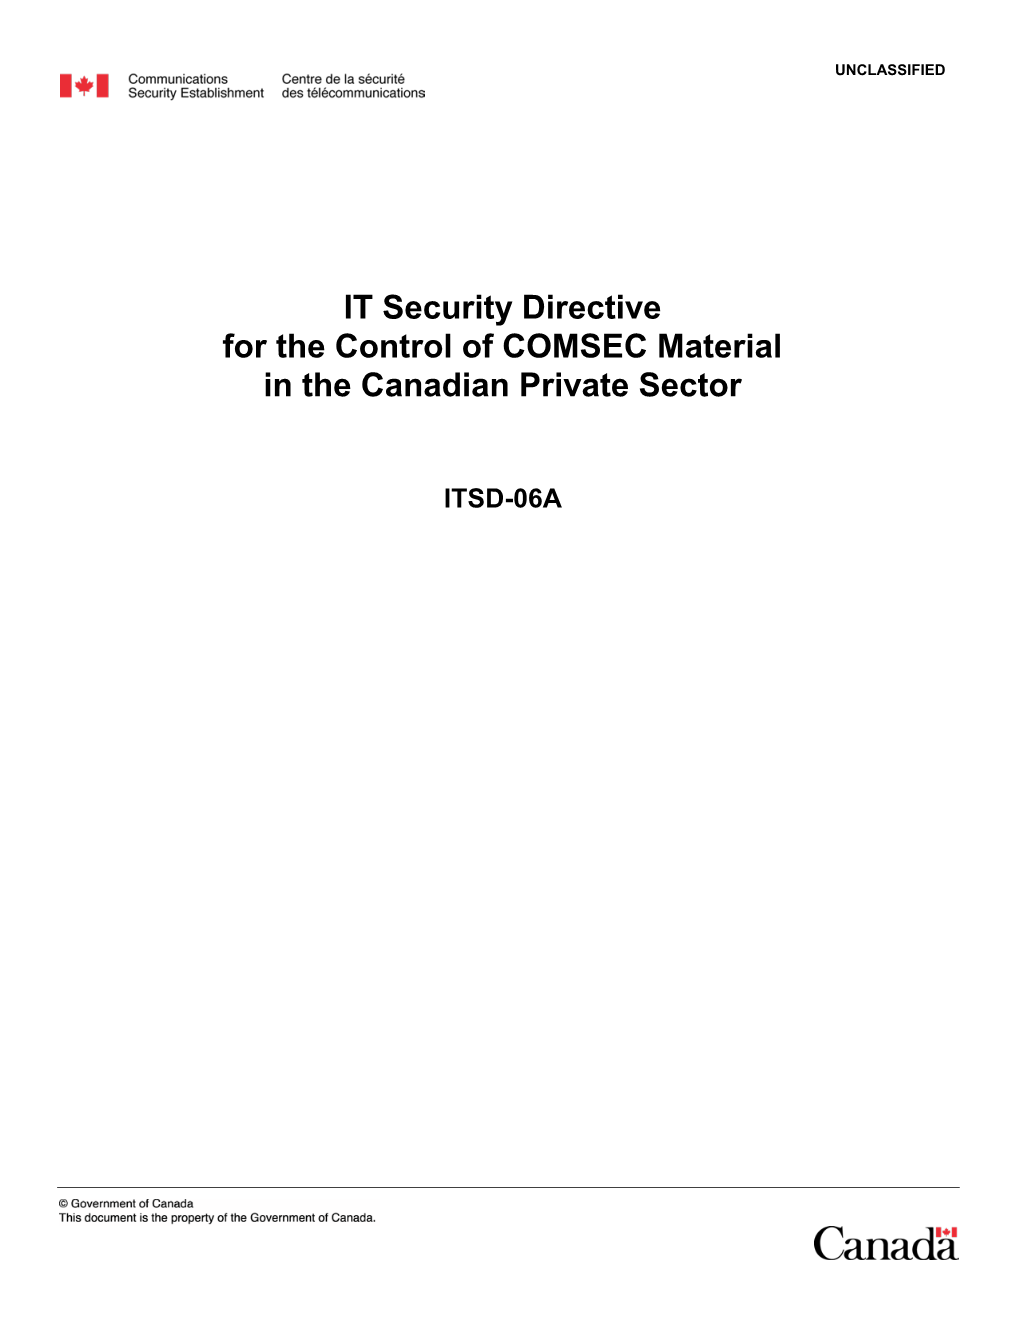 IT Security Directive for the Control of COMSEC Material in the Canadian Private Sector